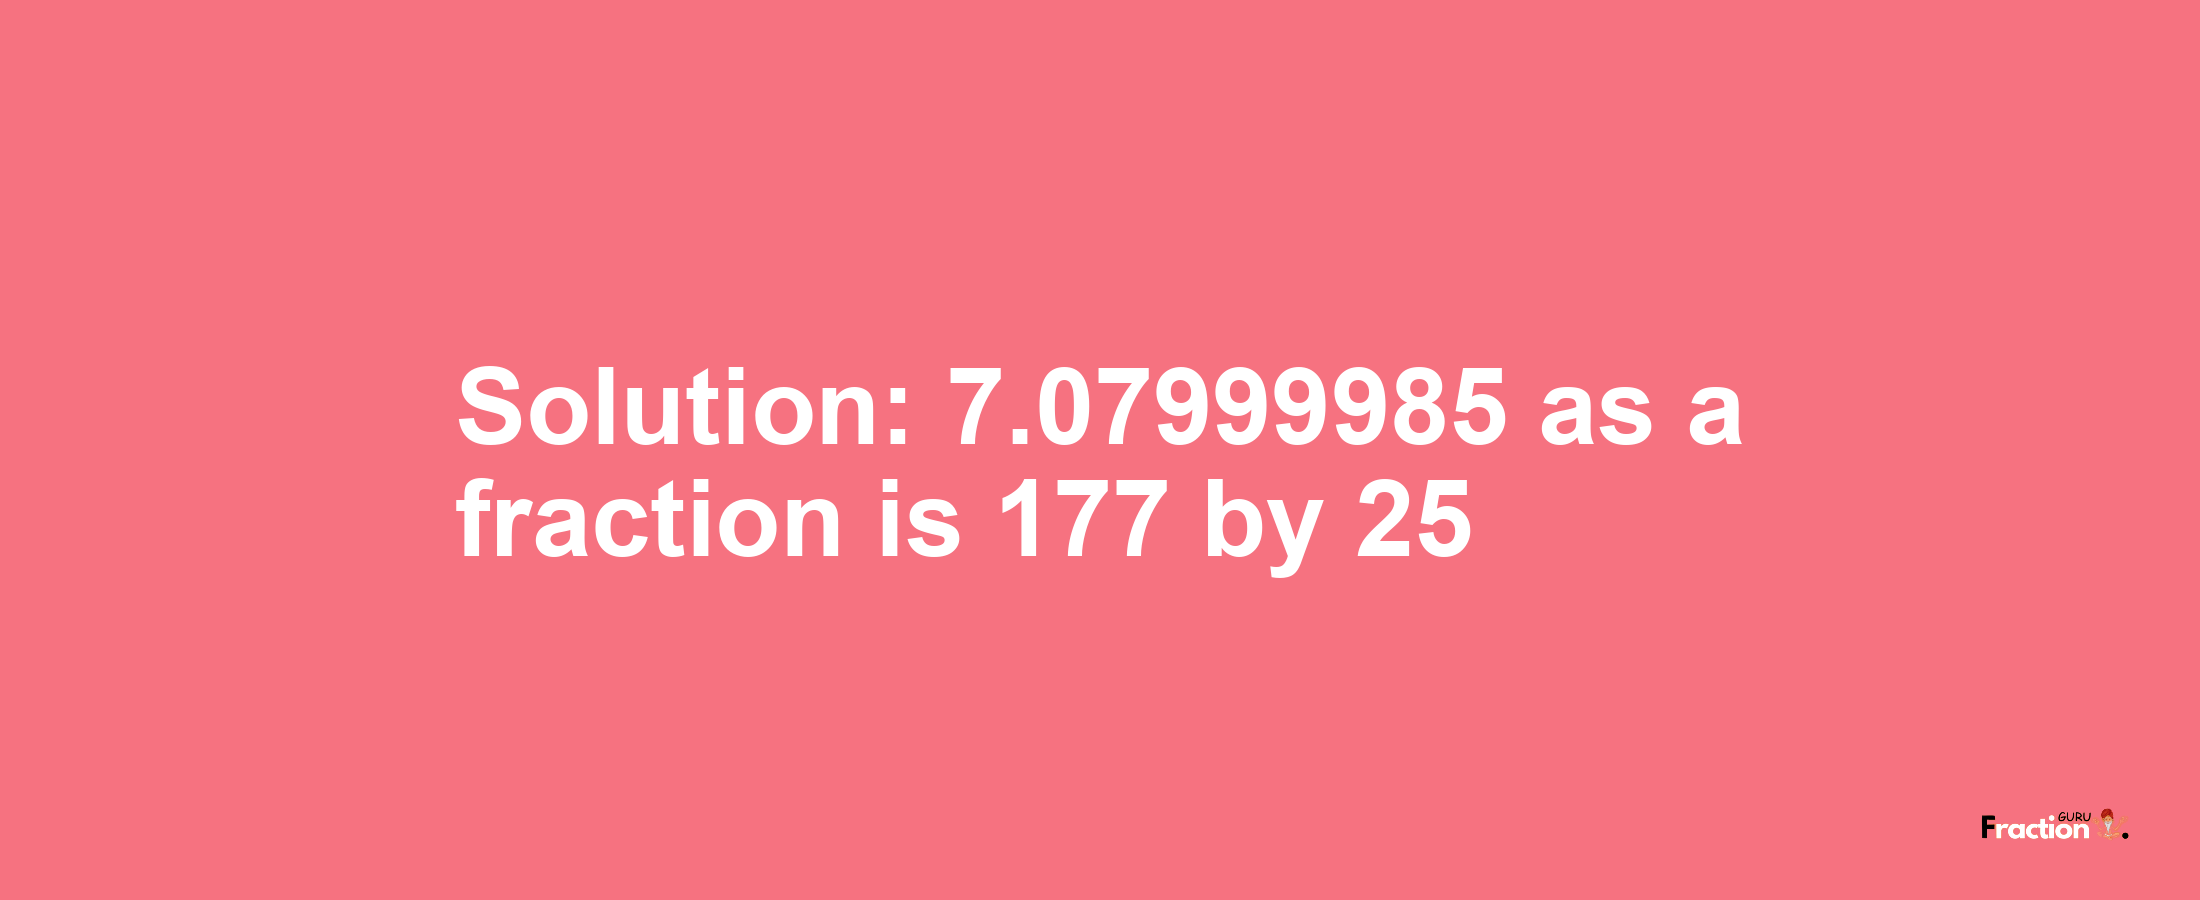 Solution:7.07999985 as a fraction is 177/25